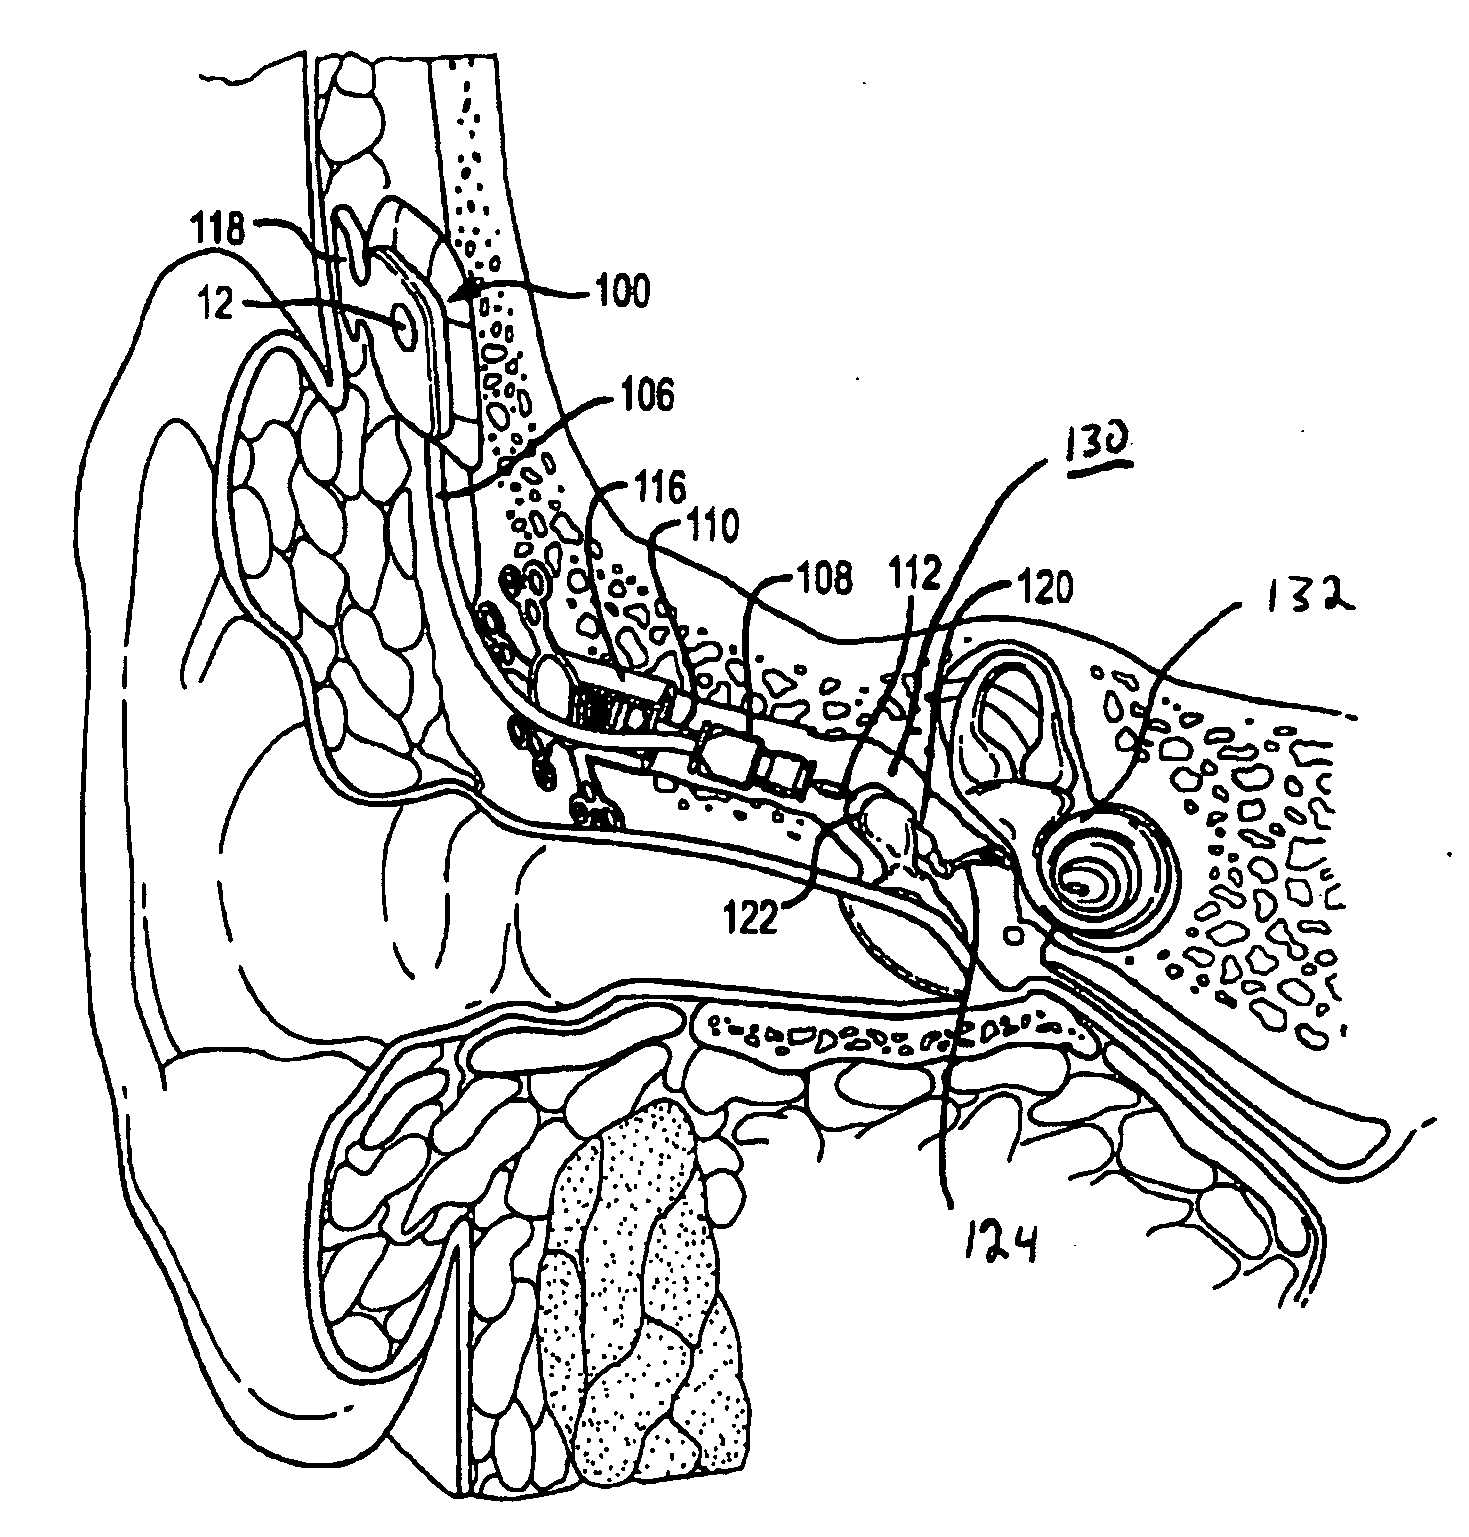 Spanning connector for implantable hearing instrument